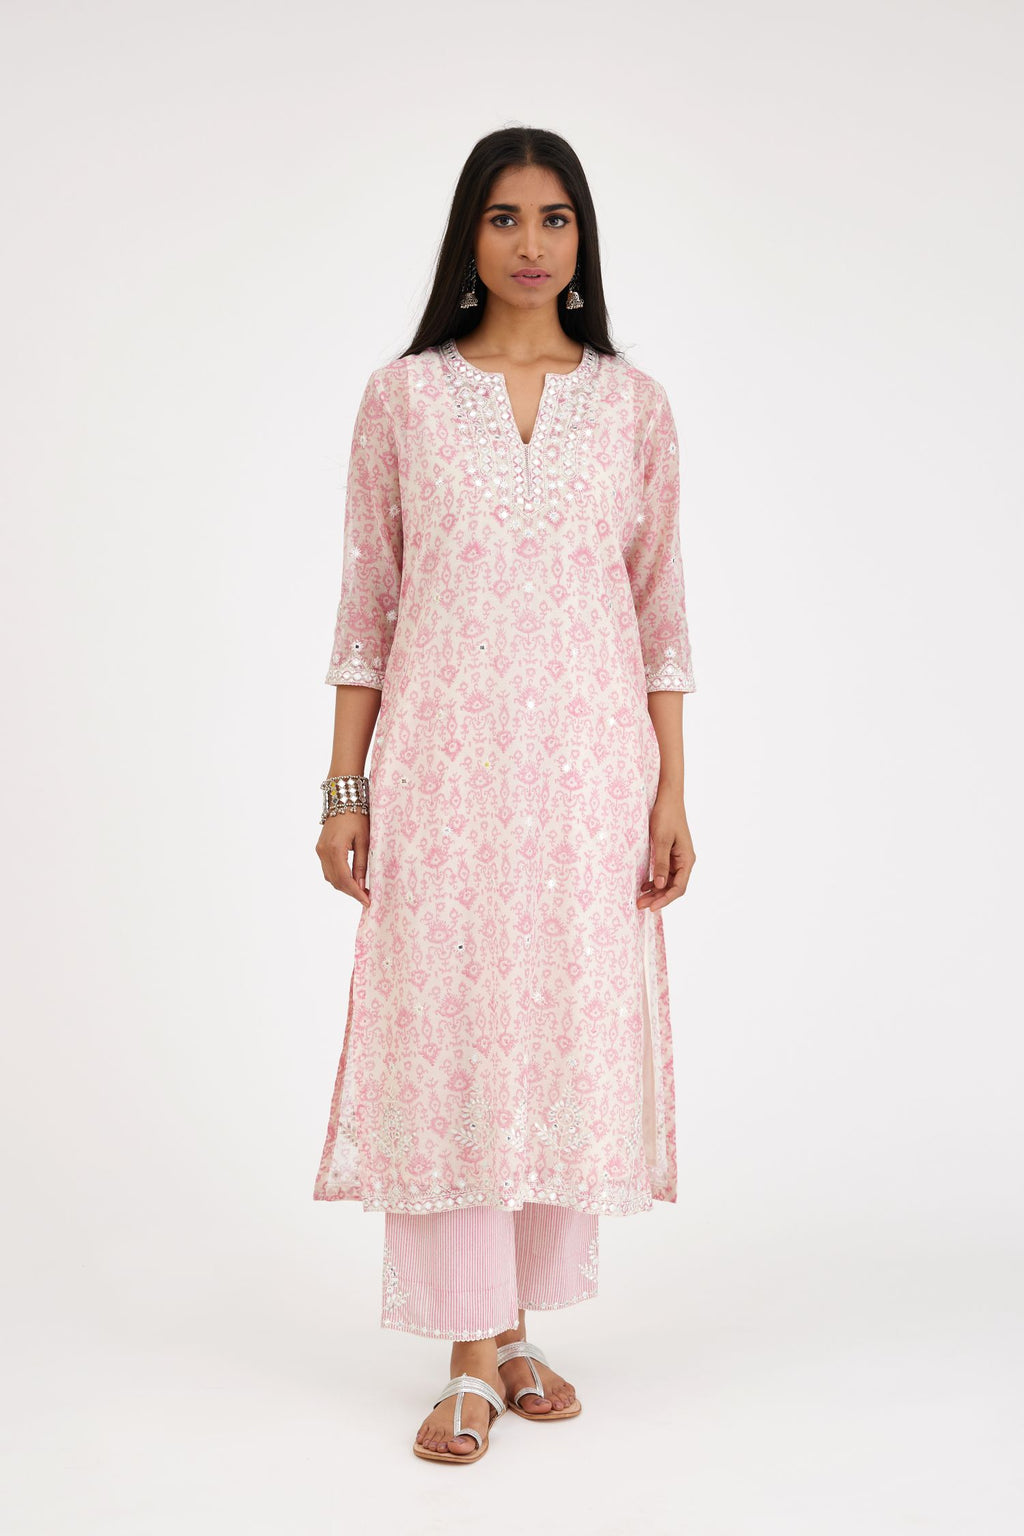 Ikat design pink and off white hand block-printed Cotton Chanderi straight long kurta set with round neck, highlighted with off-white thread and mirror embroidery.